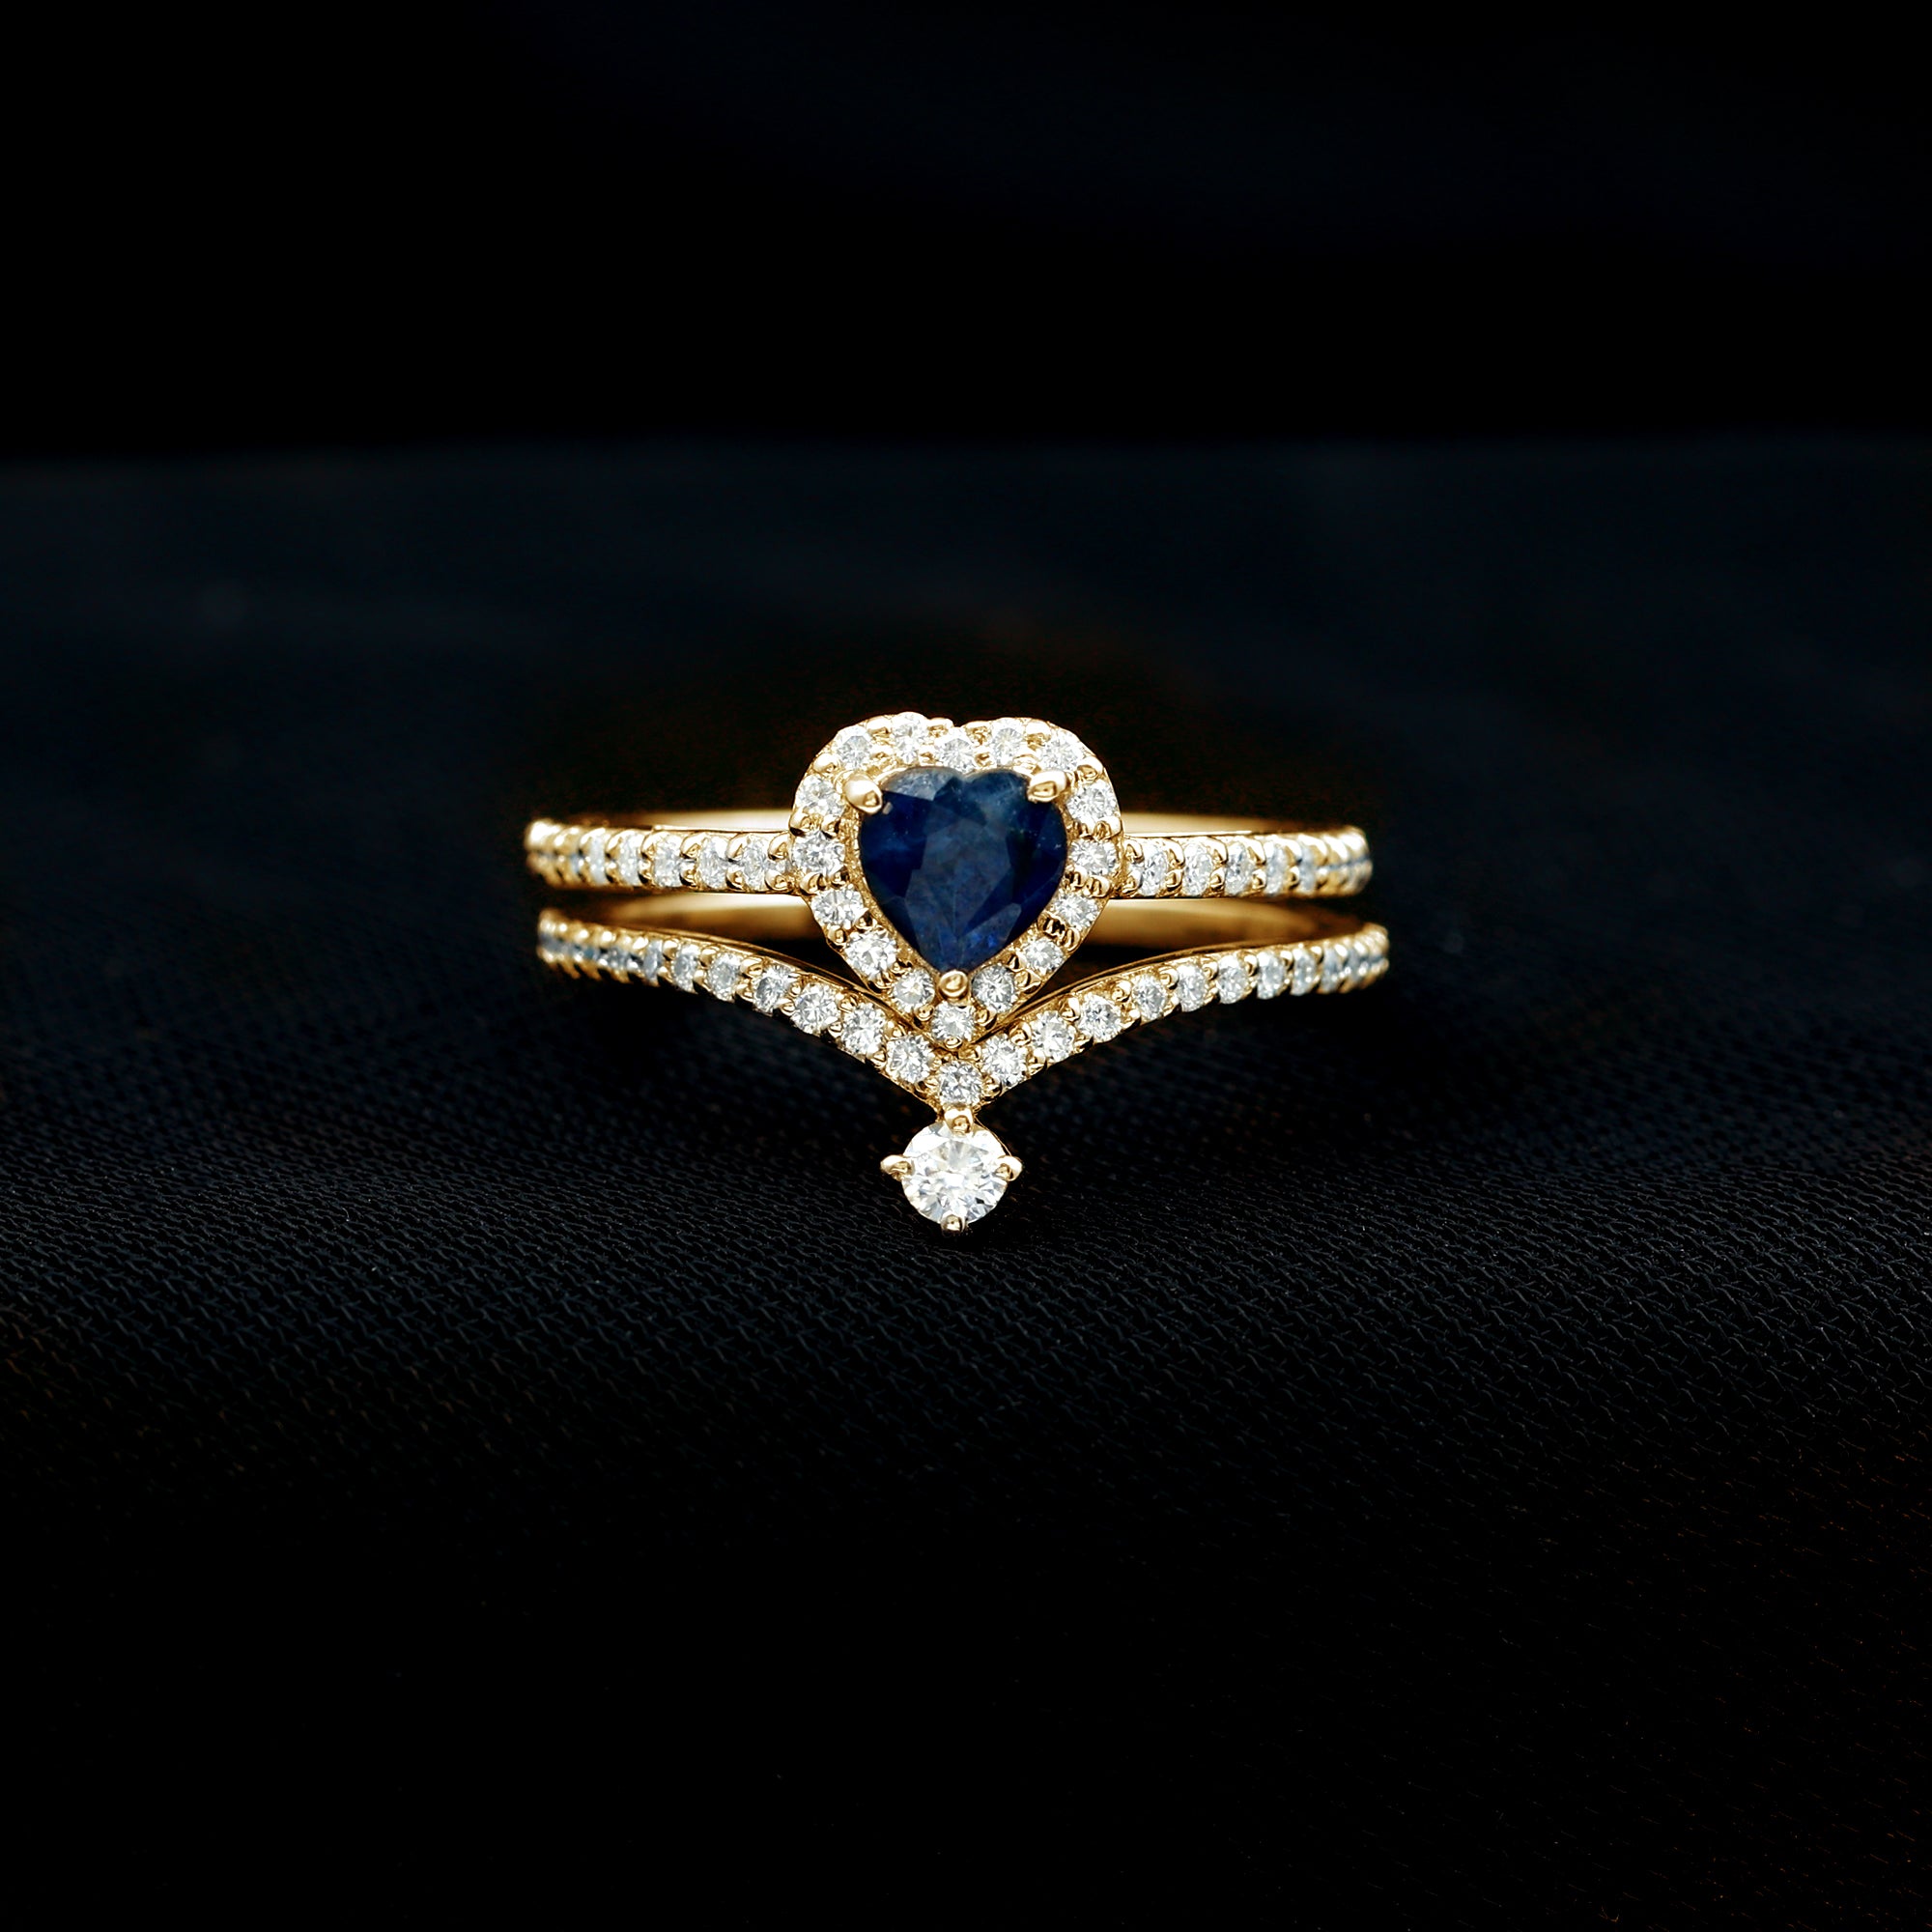 Heart Shape Blue Sapphire Ring Set with Moissanite Blue Sapphire - ( AAA ) - Quality - Rosec Jewels